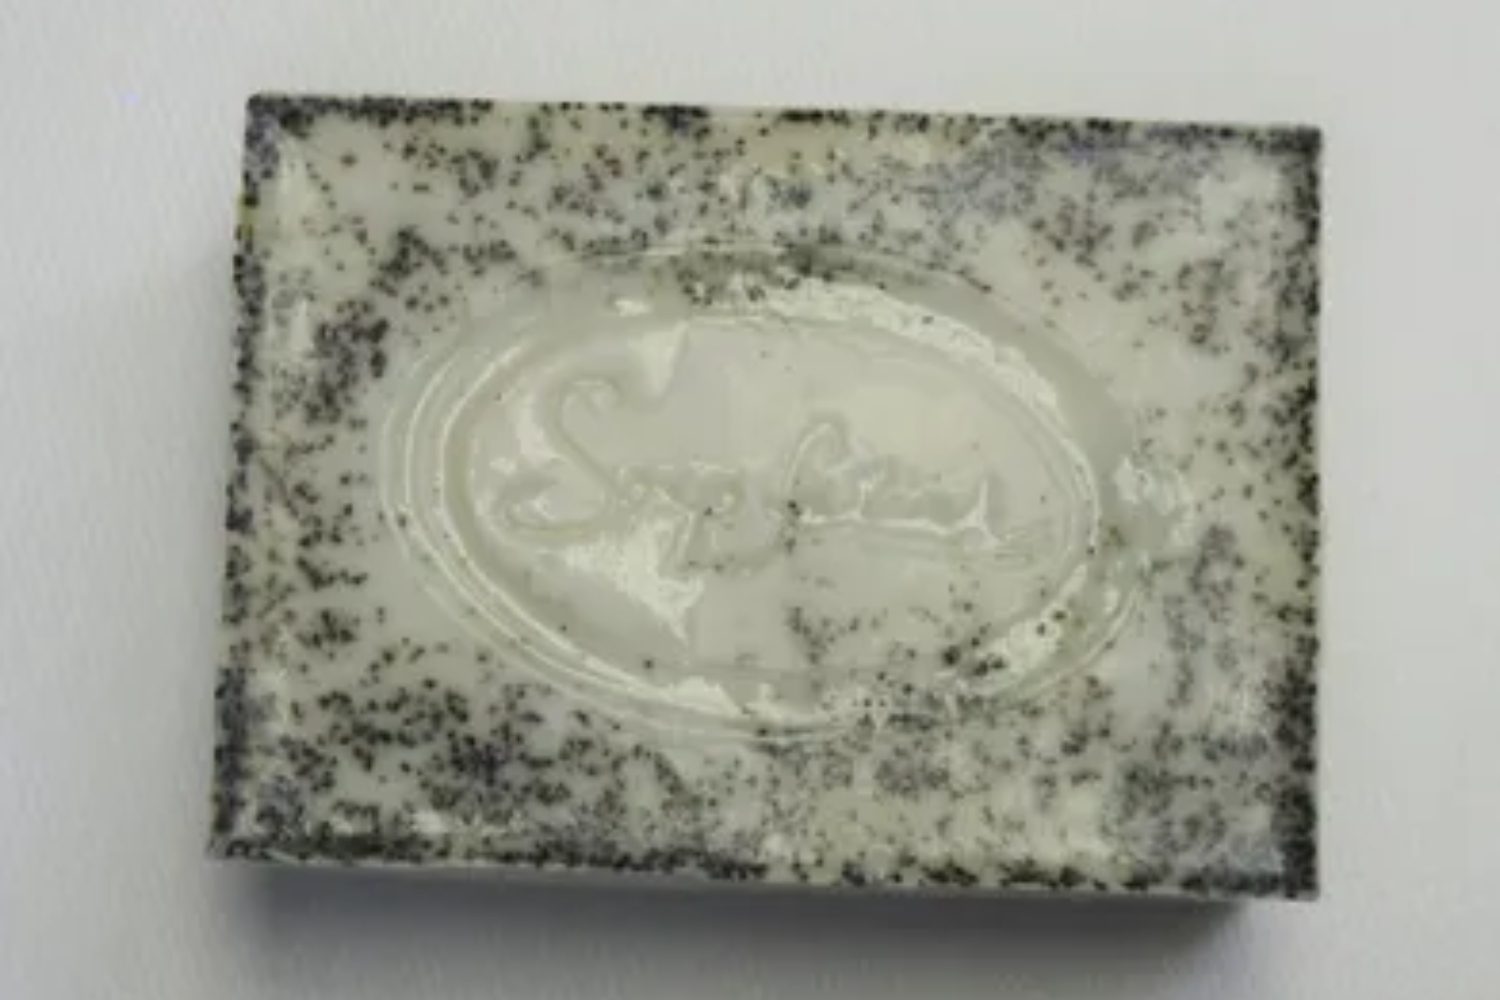 A soap that is sitting on top of the counter.